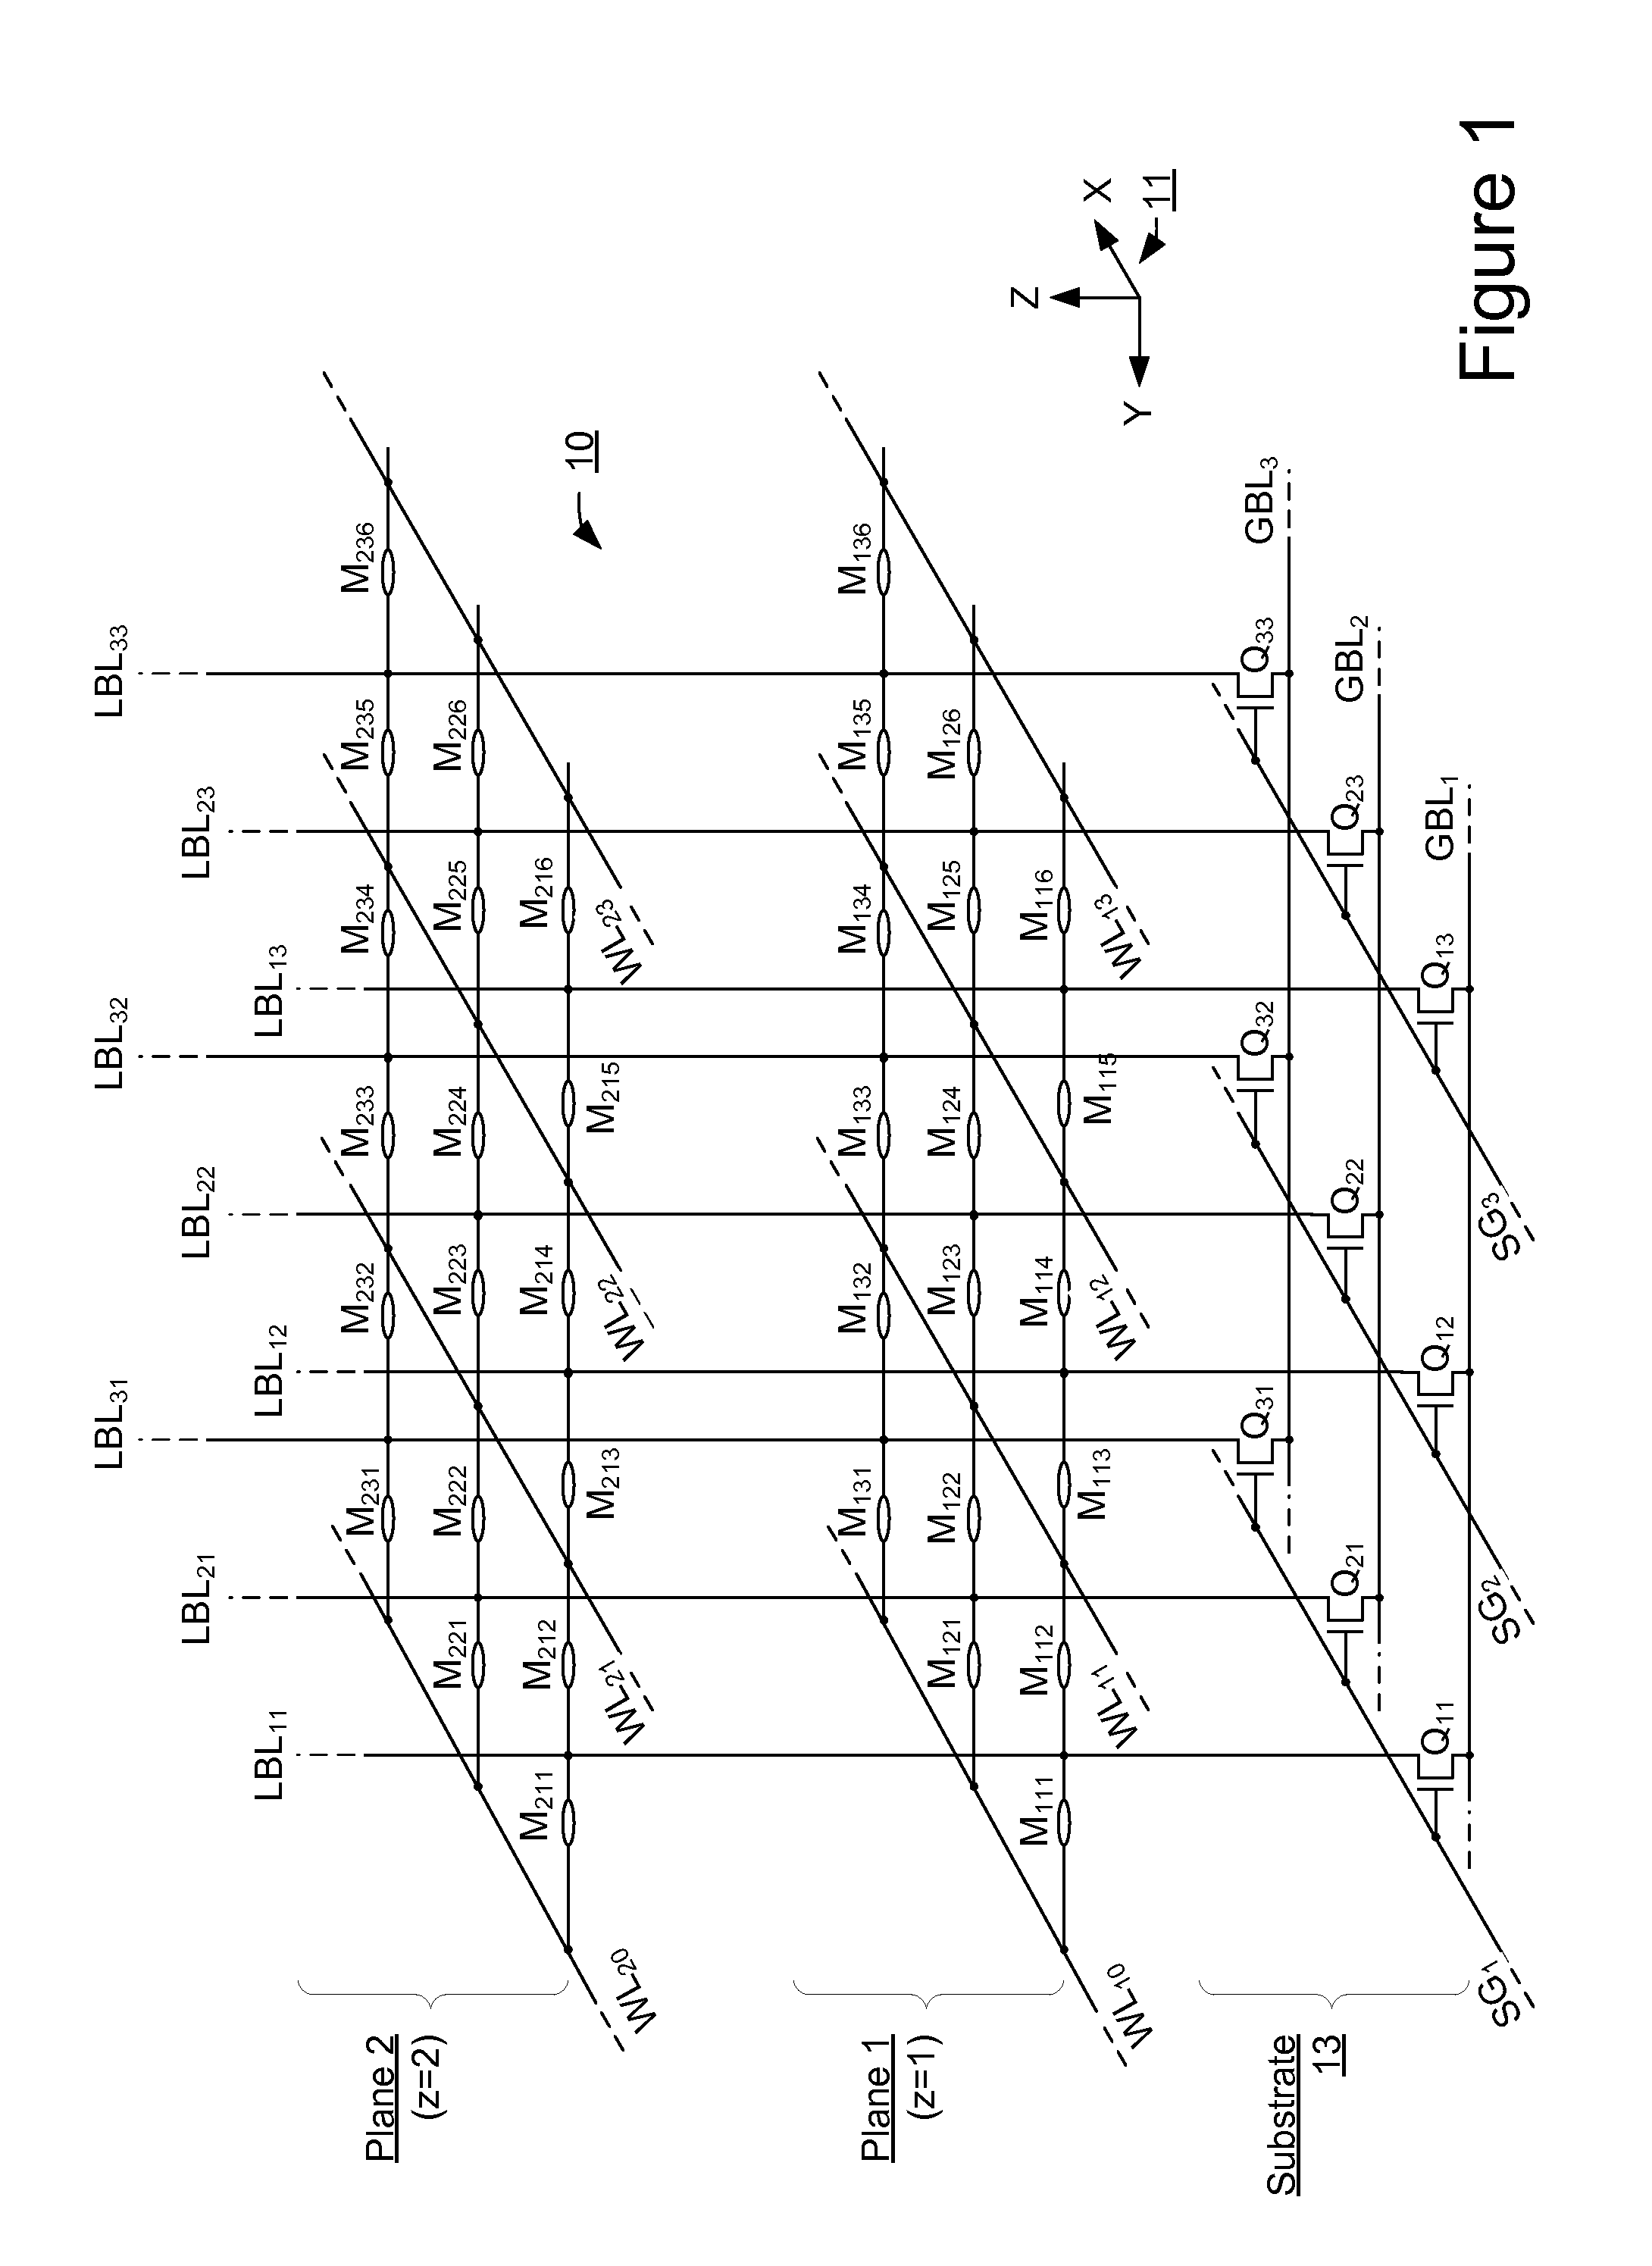 Three dimensional non-volatile storage with dual gate selection of vertical bit lines